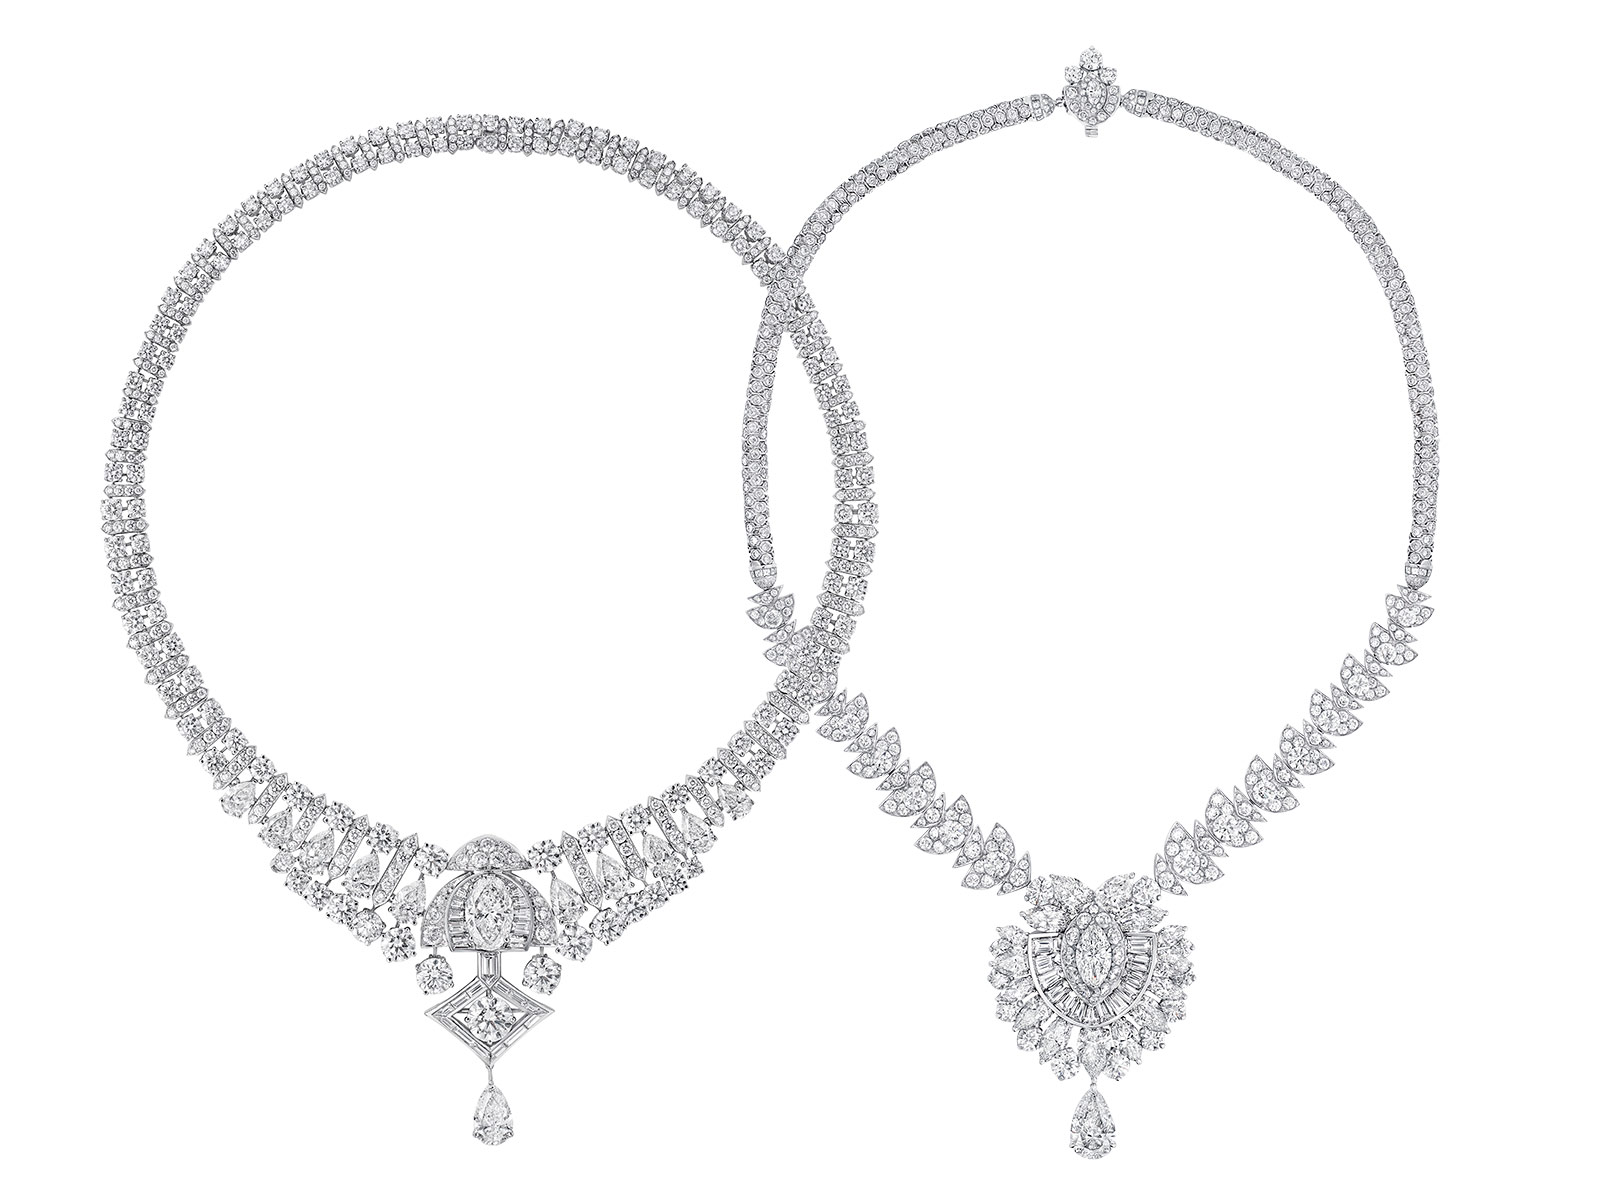 Two necklaces from the Graff Tribal High Jewellery Collection with 52 carats and 43 carats of diamonds, respectively 